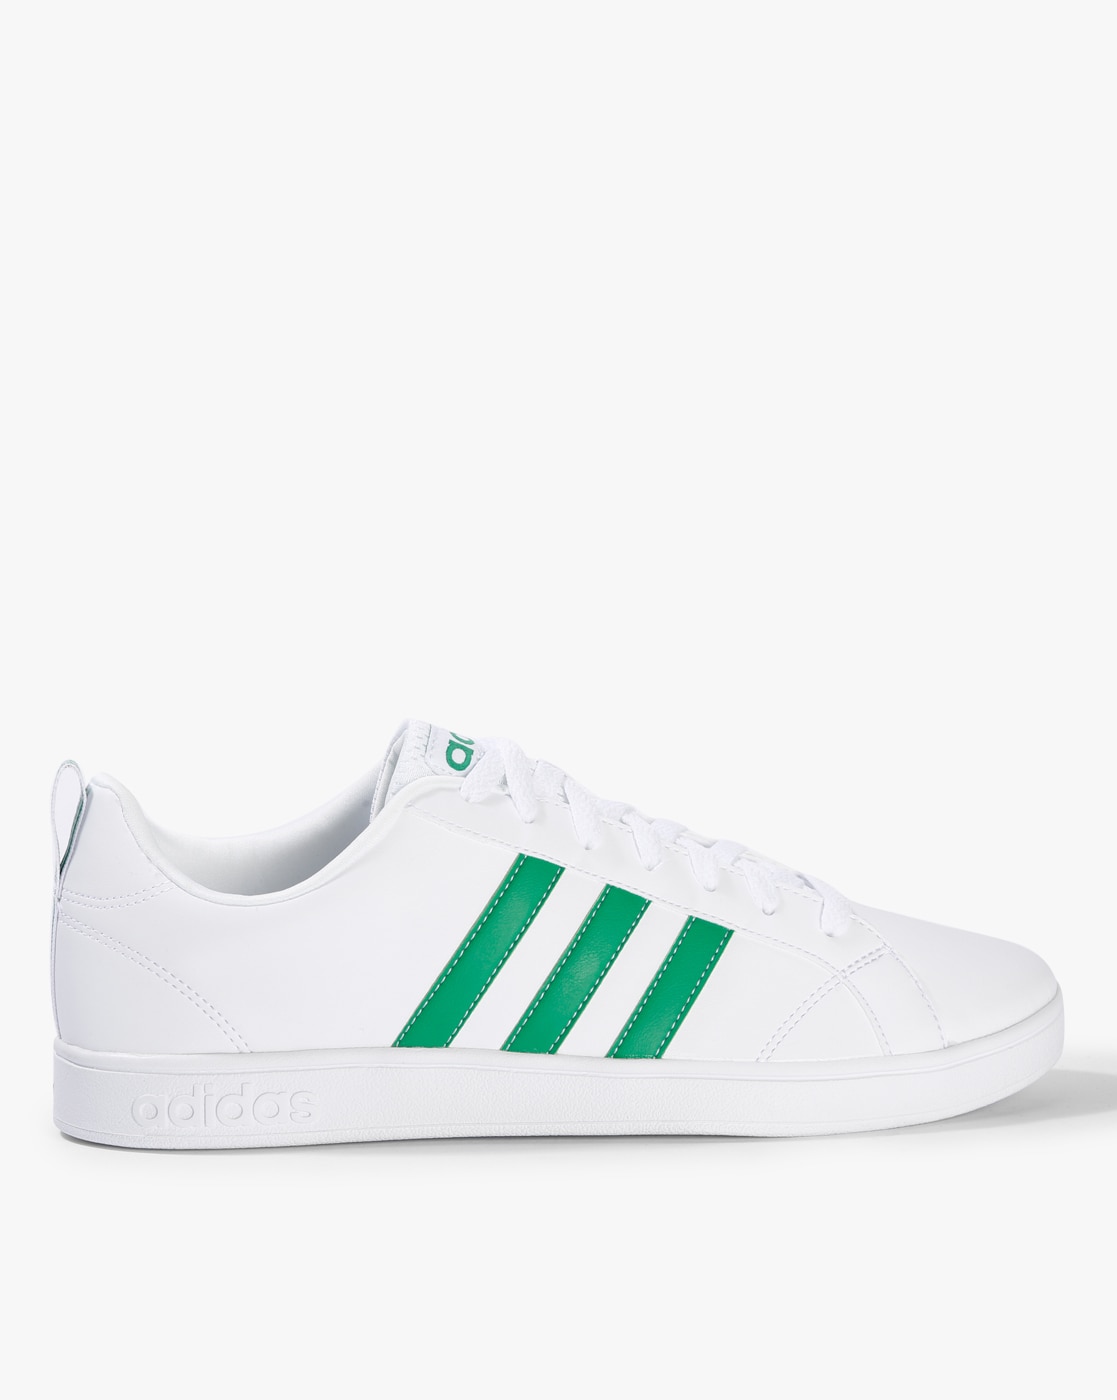 white adidas shoes mens casual